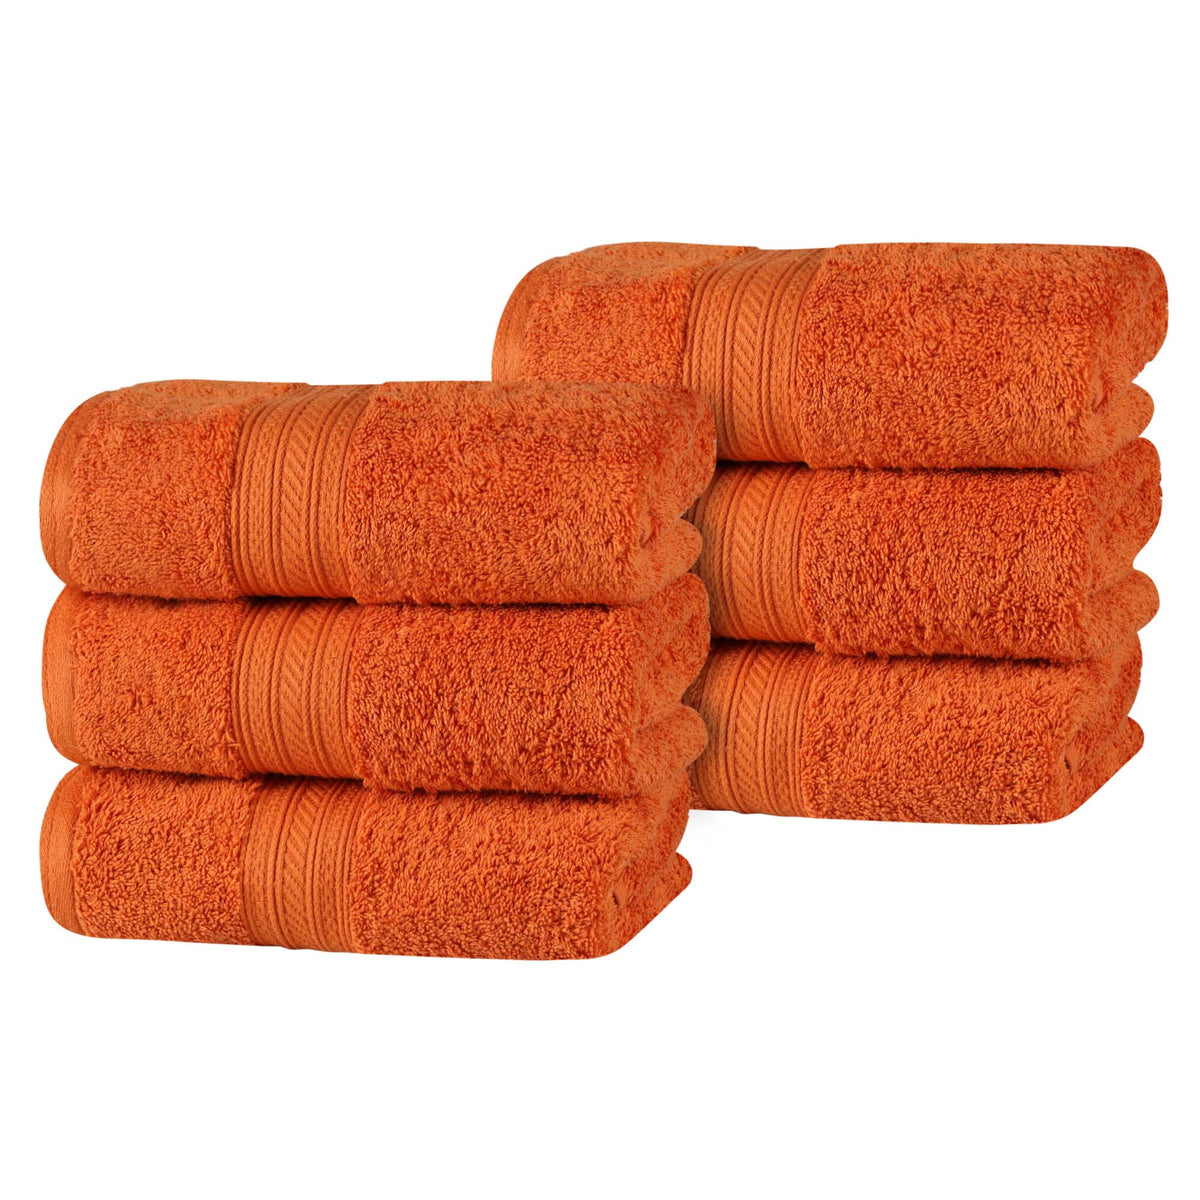 Atlas Combed Cotton Highly Absorbent Solid Hand Towels - Sandstone